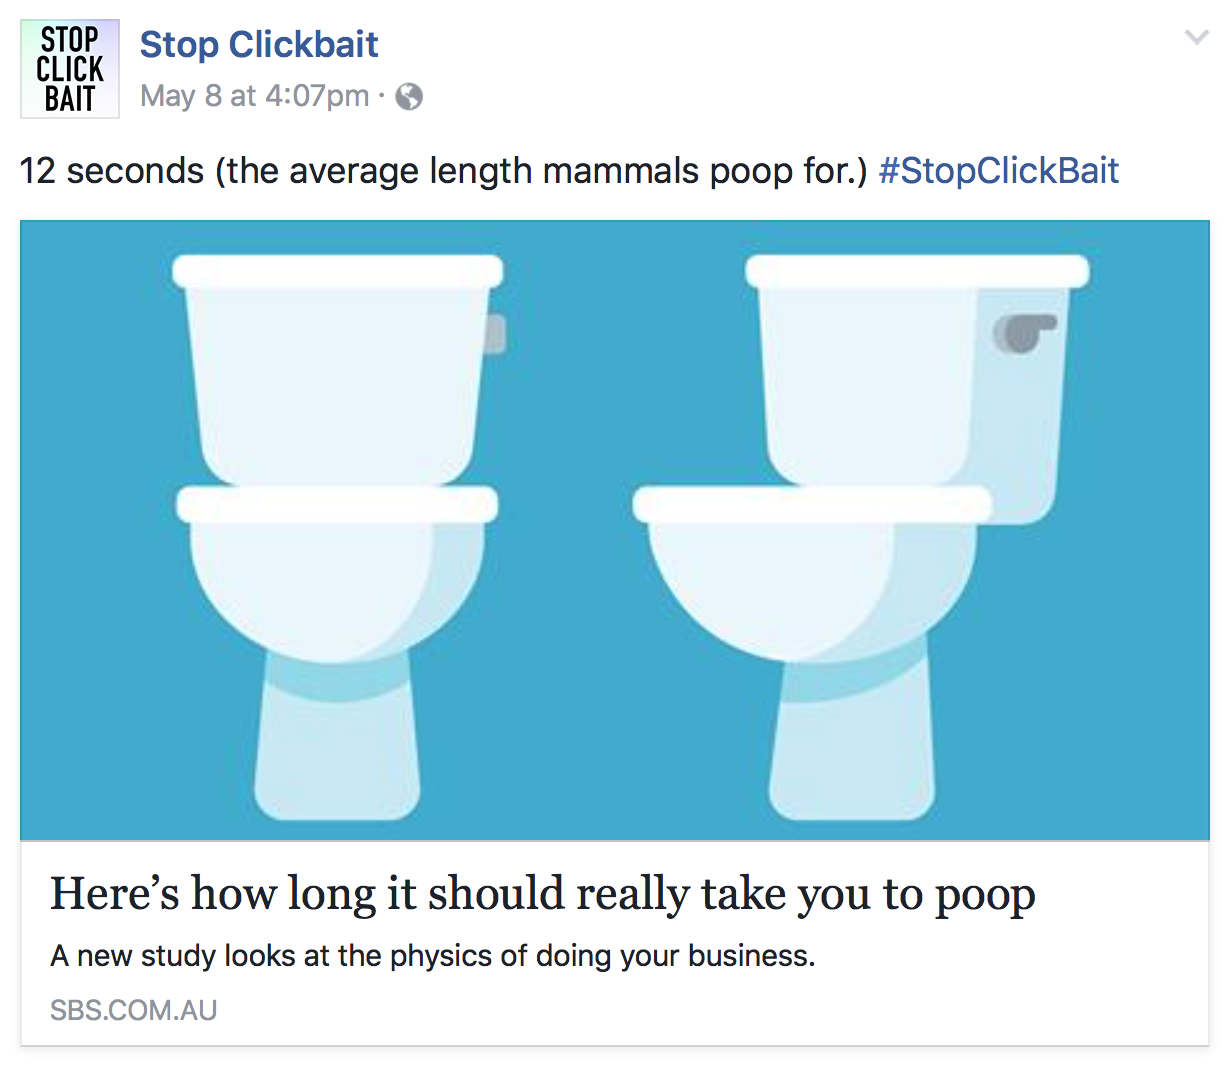 29 Posts From Stop Clickbait That Did Everyone a Favor.